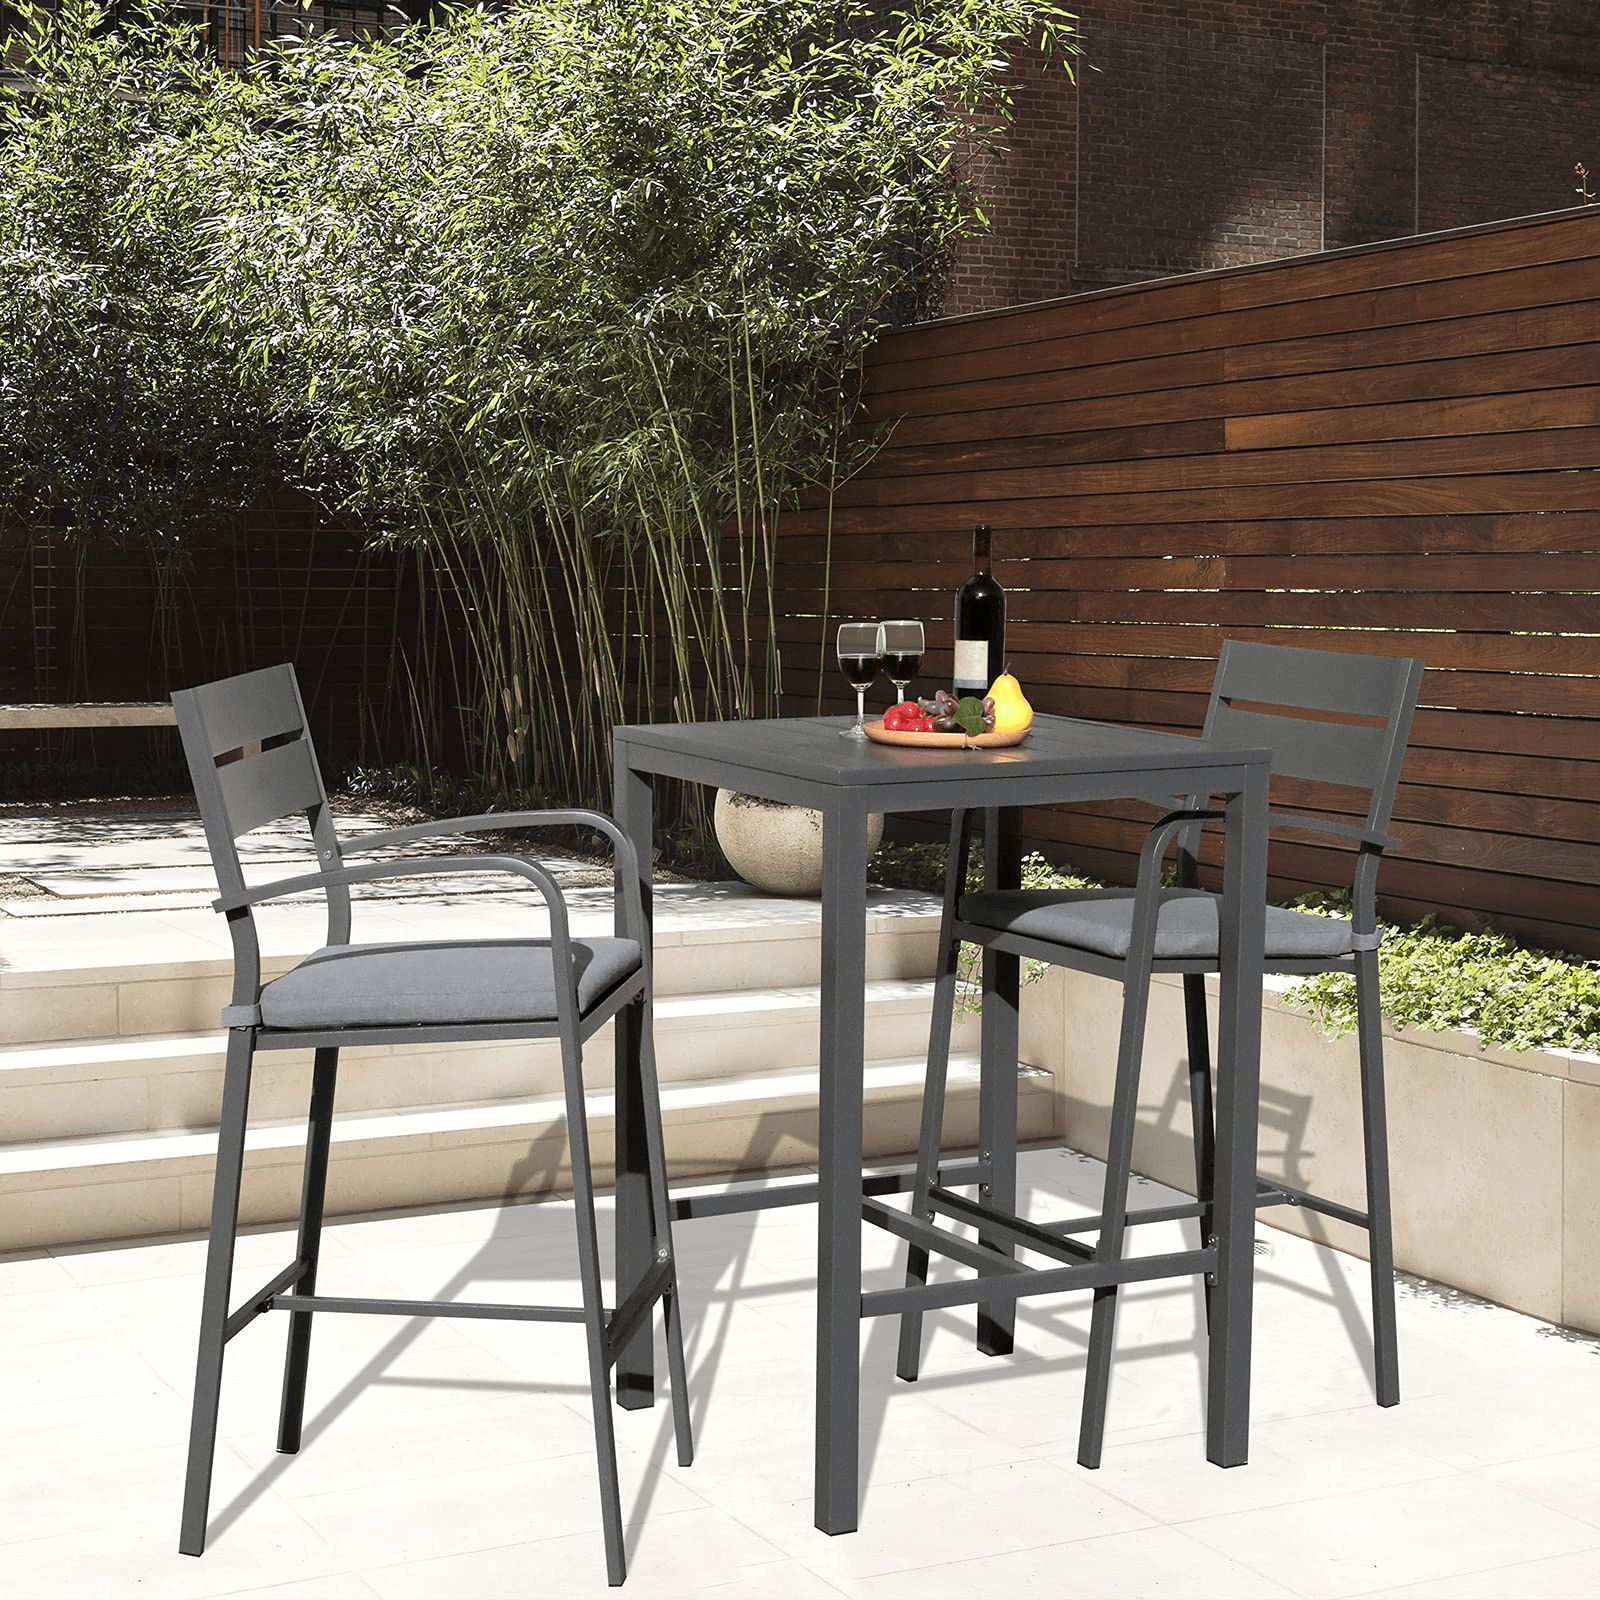 3pcs Outdoor Bar Set, Aluminum Chairs and Tables, White & Dark Grey | Orange-Casual